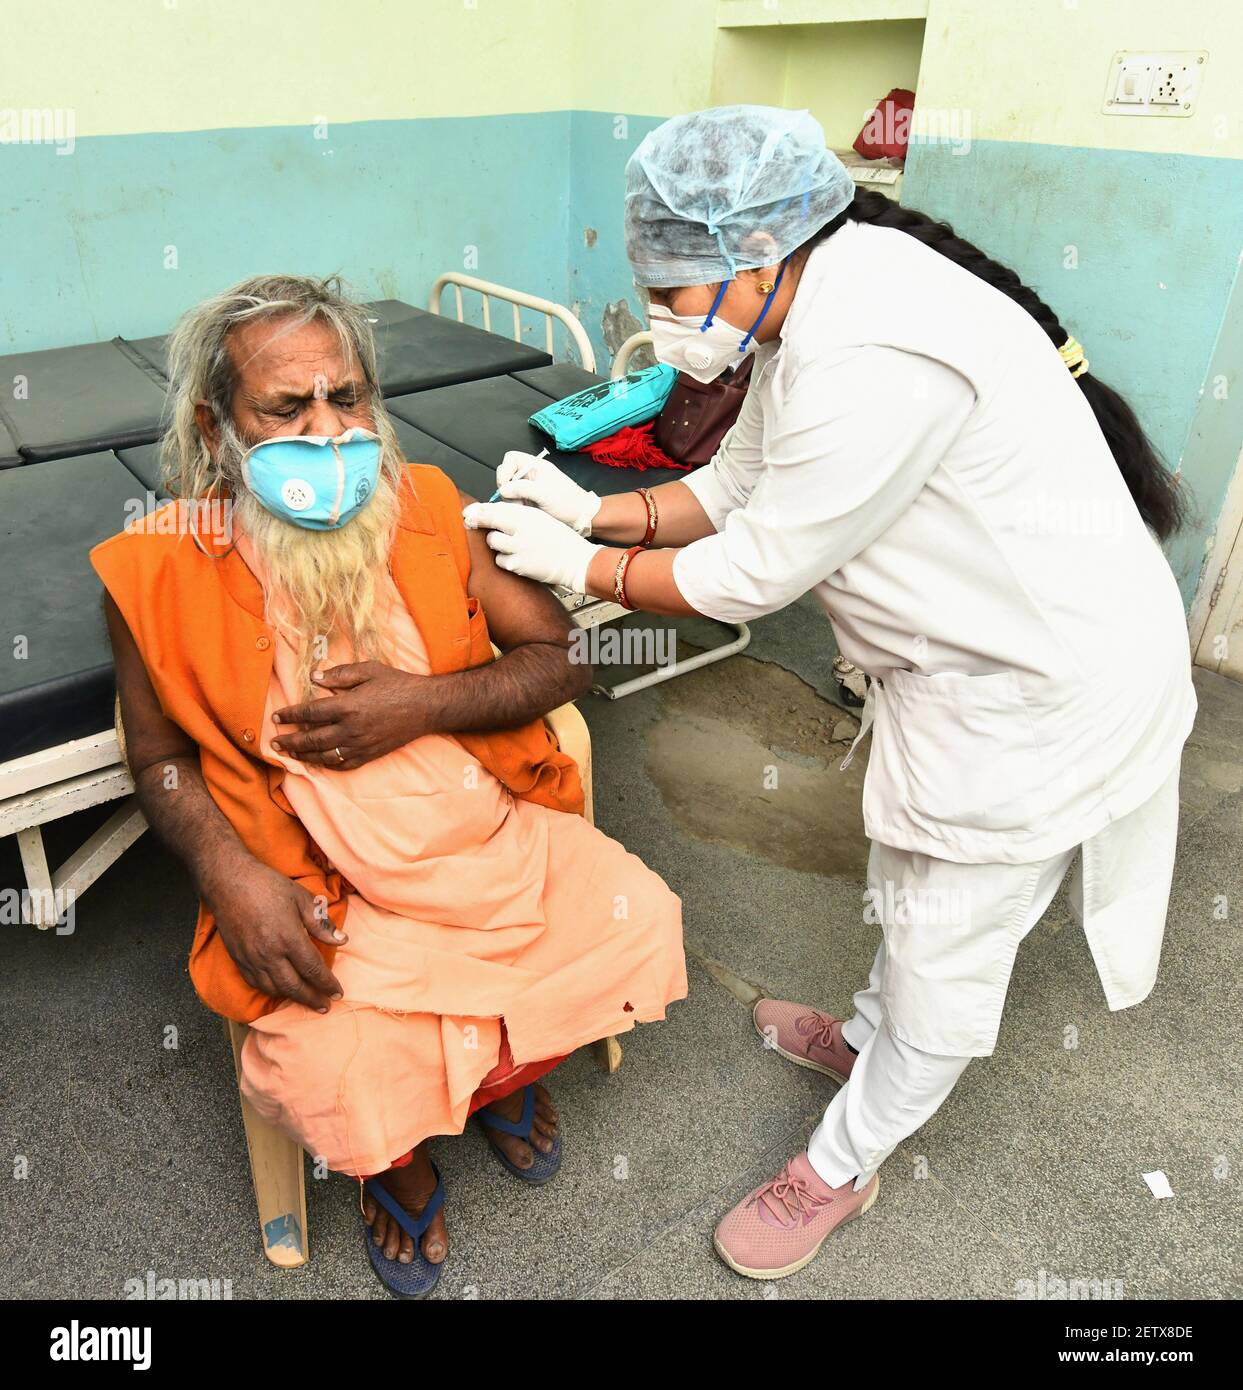 Beawar, India. 02nd Mar, 2021. An elderly monk being administered COVID-19 vaccine, during a countrywide inoculation drive, at Government hospital in Beawar. The second phase of the Covid-19 vaccination drive started for people 60 years of age and above. 70 years old Indian Prime Minister Narendra Modi also received his first dose of Corona vaccine at AIIMS in New Delhi on Monday. (Photo by Sumit Saraswat/Pacific Press) Credit: Pacific Press Media Production Corp./Alamy Live News Stock Photo